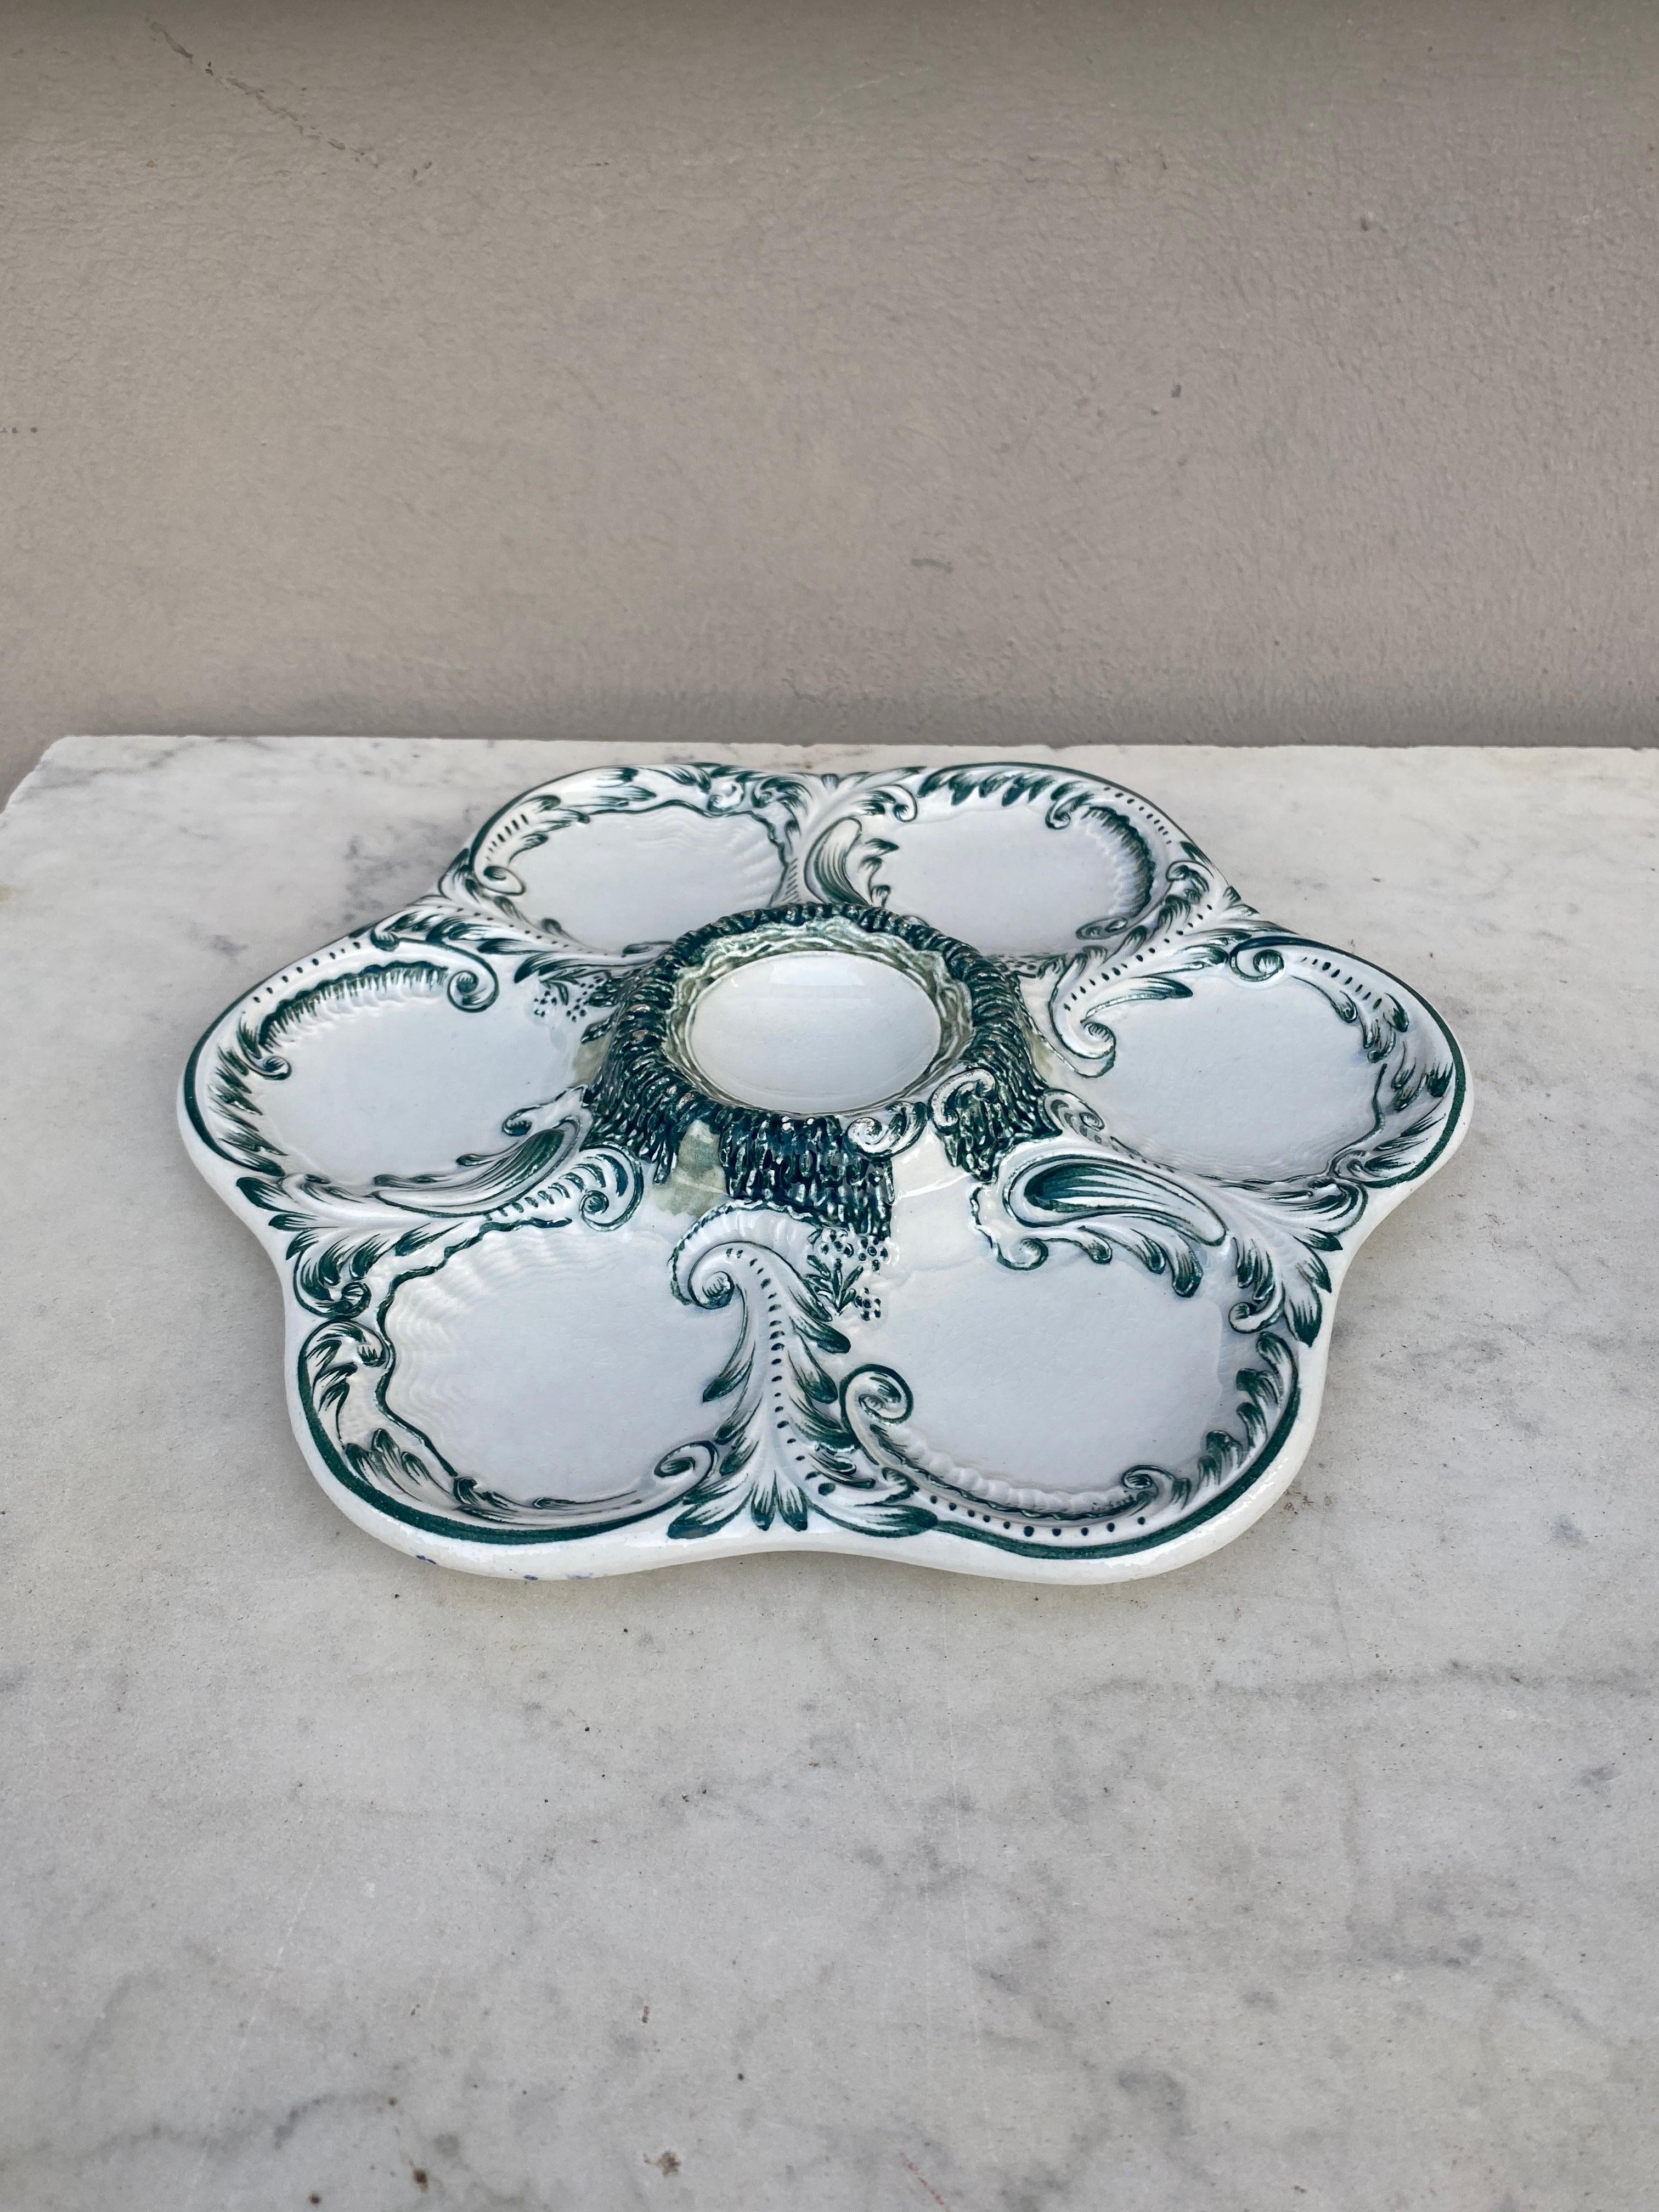 French Majolica oyster plate with green acanthus leaves, circa 1890.